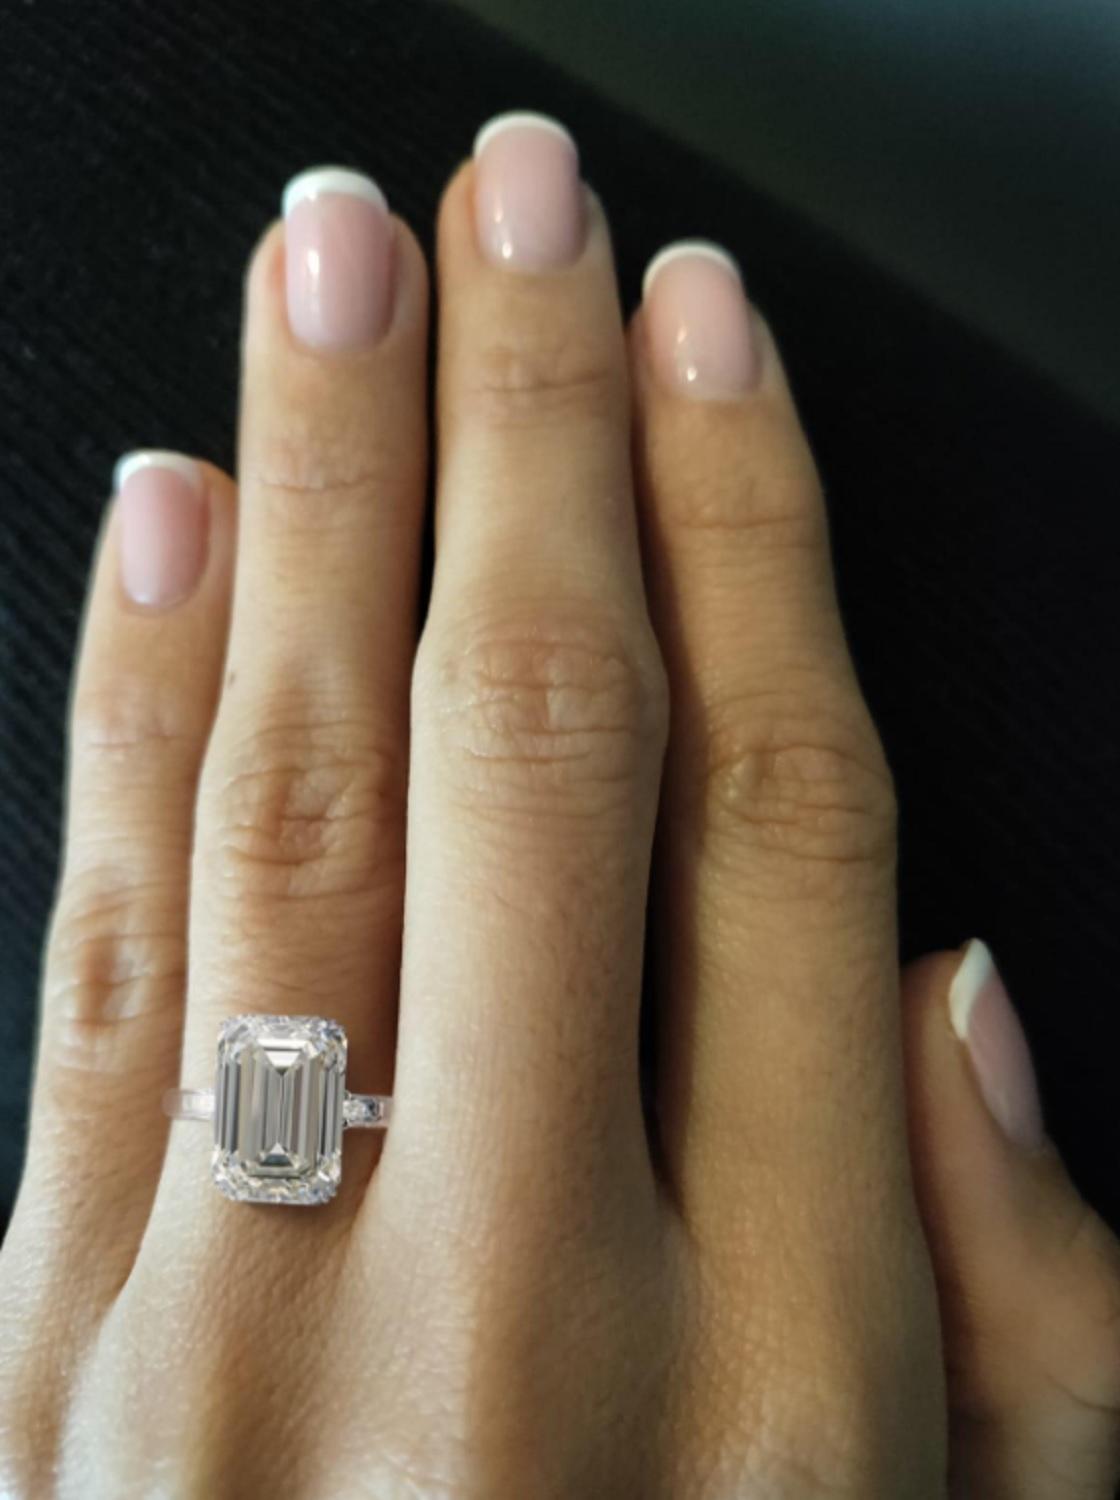 An exquisite emerald cut diamond certified by GIA.

The main stone has been certified as VS1 clarity and J color with a white face and excellent cut and polish

